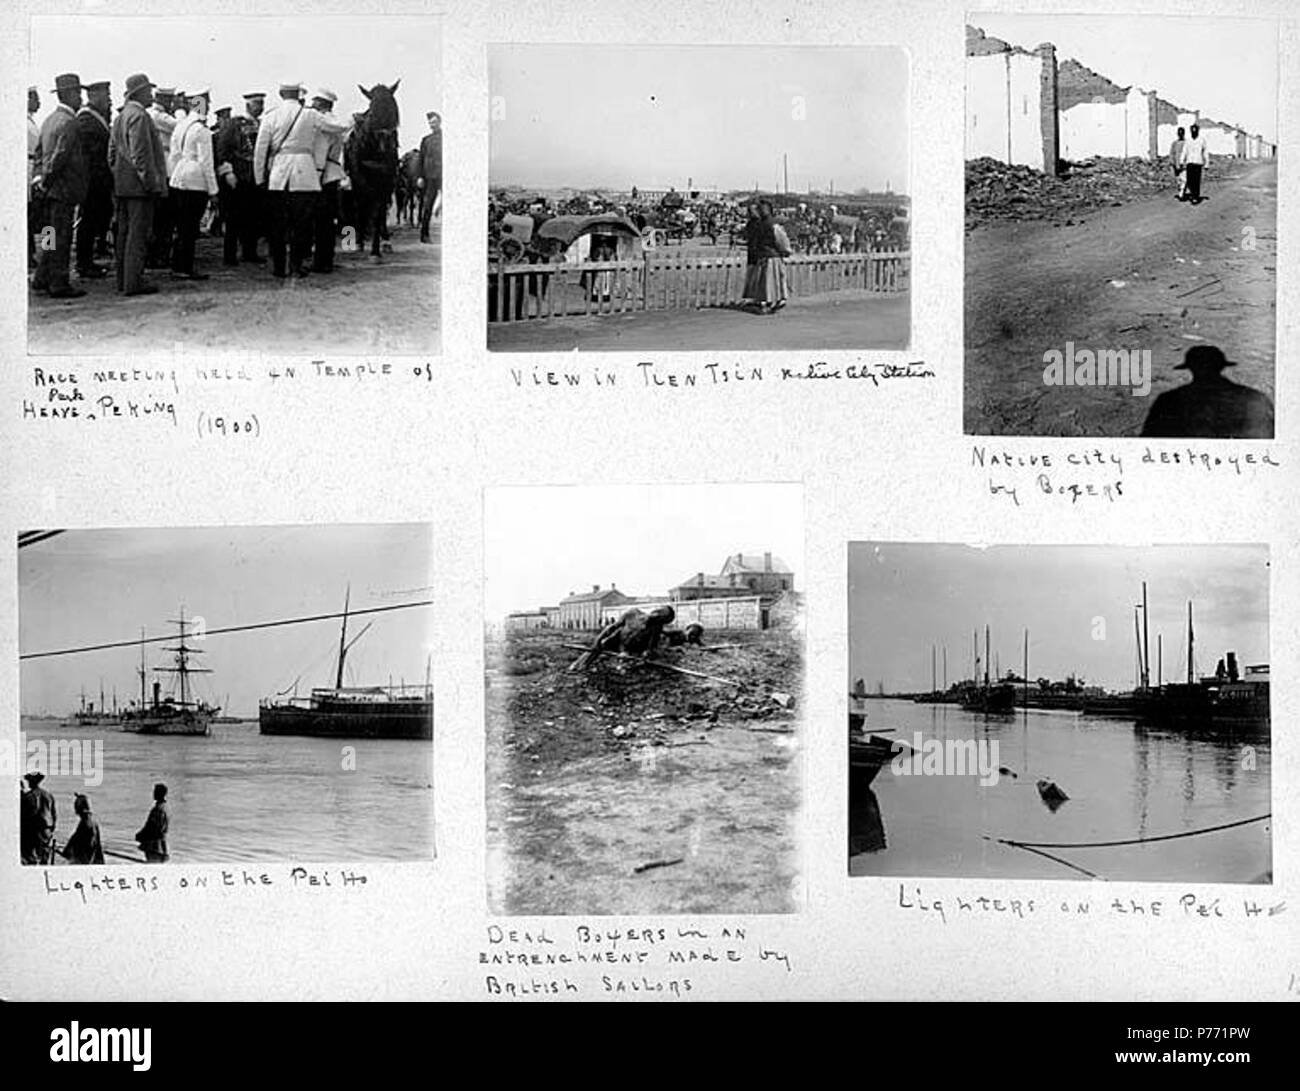 . English: 7.18 Aftermath of Boxer Rebellion, ca. 1899-1905 . English: Captions on album page: Race meeting held in Temple of Heaven Park, Peking (1900); View in Tien Tsin native city station; Native city destroyed by Boxers; Lighters on the Pei Ho; Dead Boxers in an entrenchment made by British sailors; Lighters on the Pei Ho . PH Coll 241.B18a-f Subjects (LCTGM): War damage--China; Parks--China--Beijing; Ethnic neighborhoods--China; Ships--China; Rivers--China; War casualties--China Subjects (LCSH): China--History--Boxer Rebellion, 1899-1901--Destruction and pillage; Whites--China  . circa 1 Stock Photo